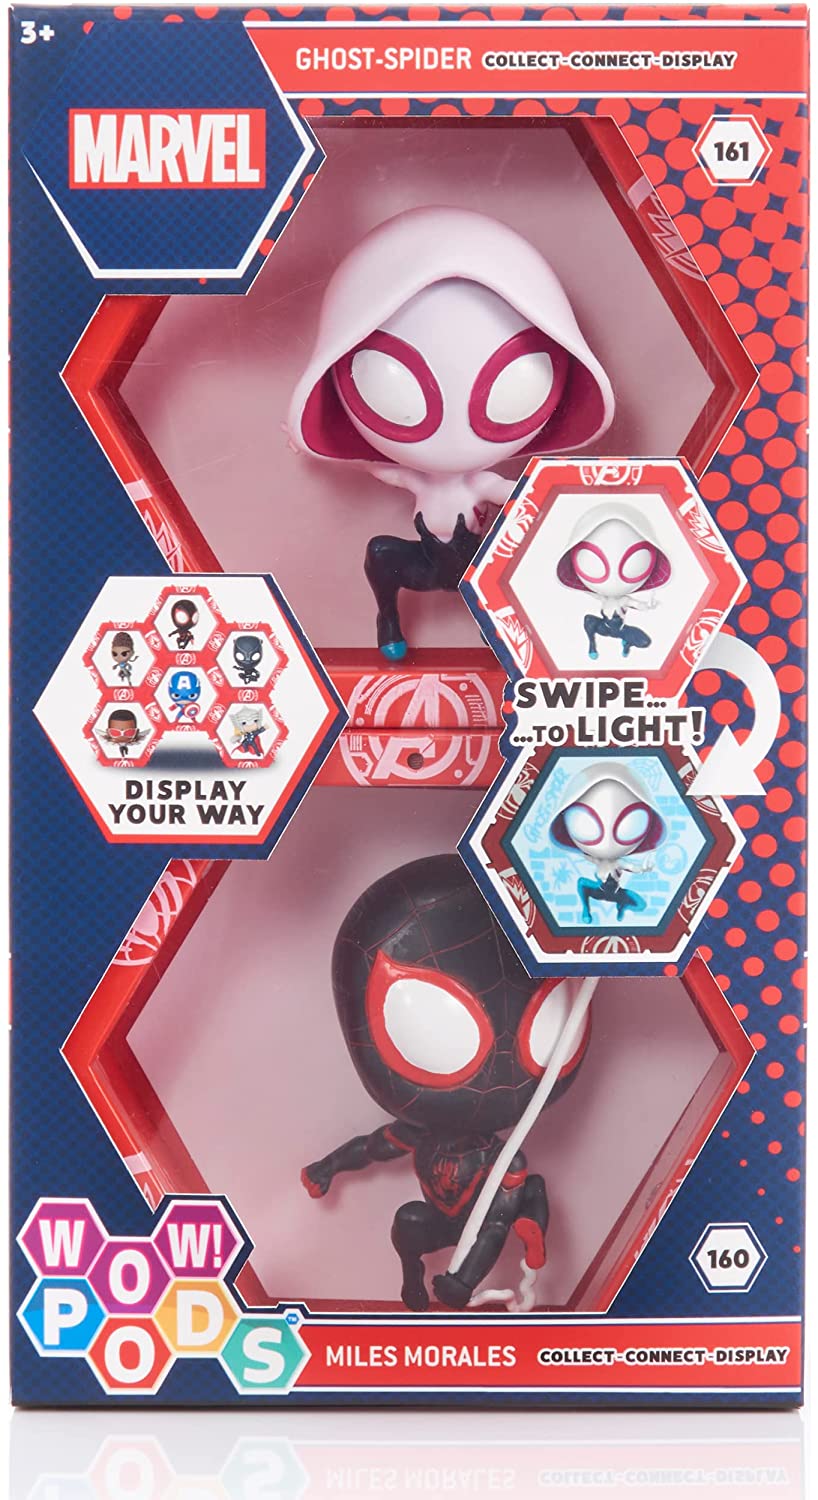 WOW! PODS Spiderman Collection - Miles Morales and Spider Gwen | Superhero Light-Up Bobble-Head Figures | Official Marvel Collectable Toys & Gifts, Spiderman Collection - Twin Pack